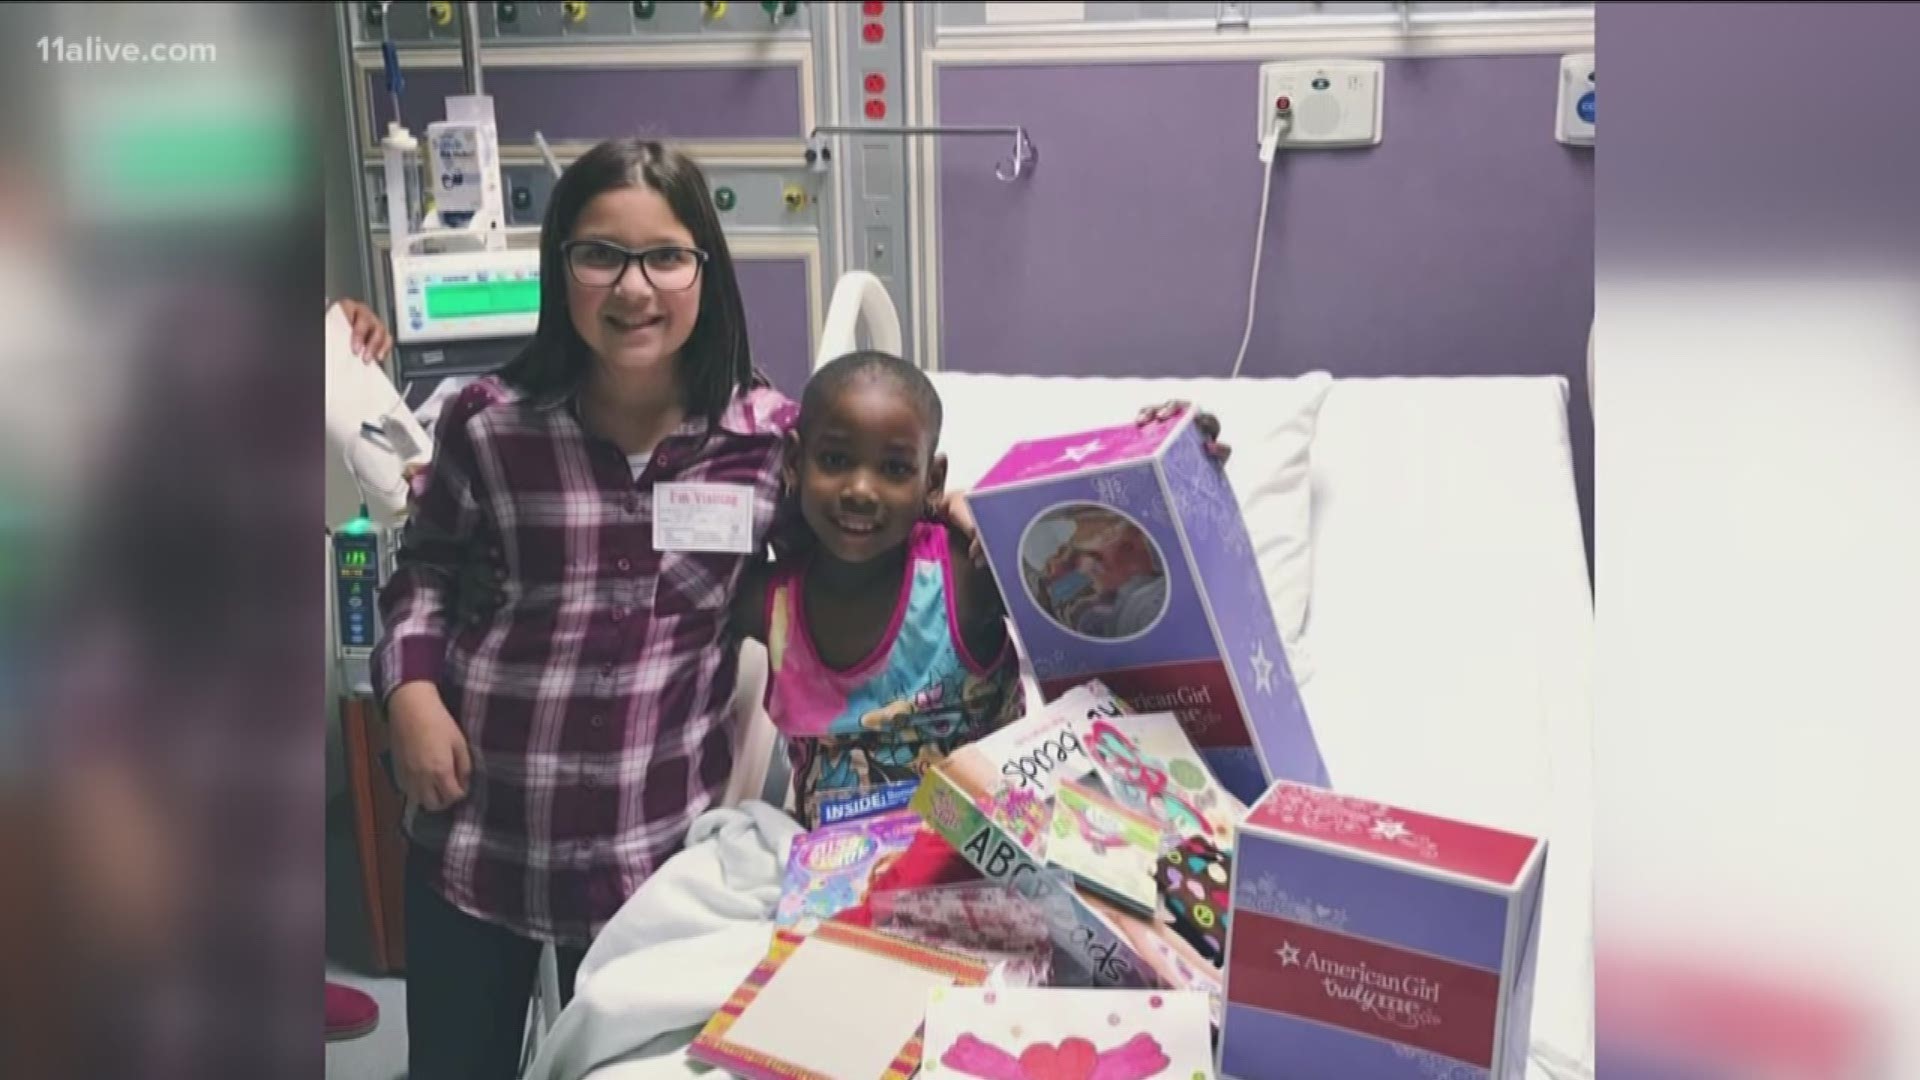 Whatever happened to the business savvy fifth grader from Alpharetta? Well she's still gifting dolls and making a difference.